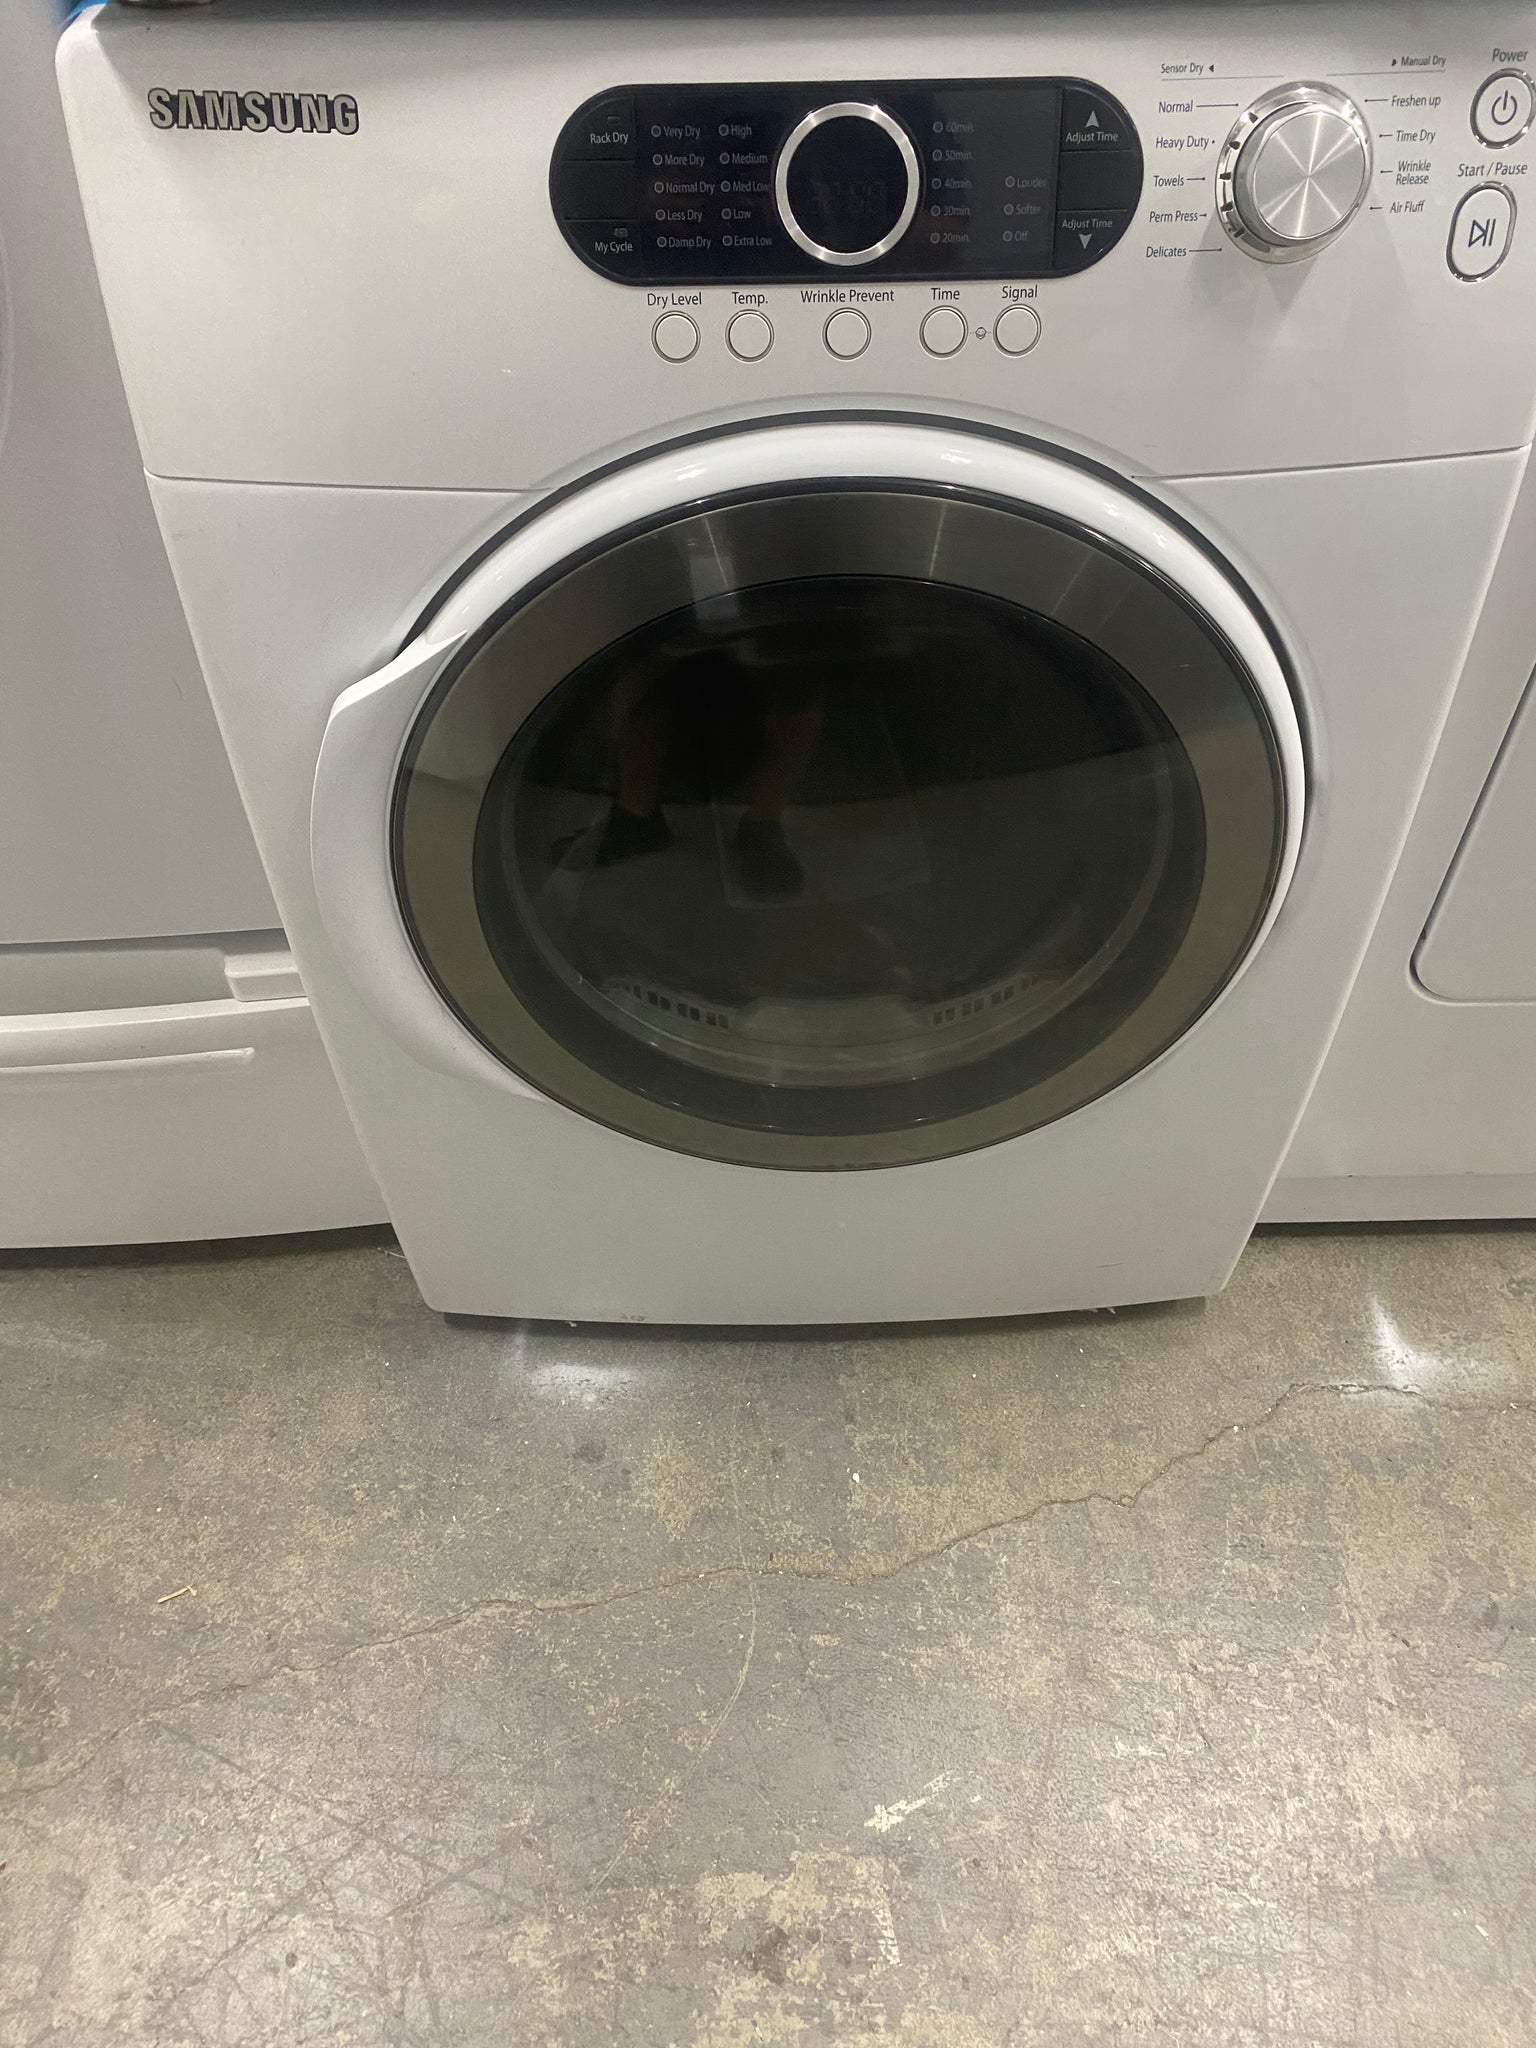 USED ELECTRIC FRONT LOAD DRYERS WITH  OR WITHOUT PEDESTALS